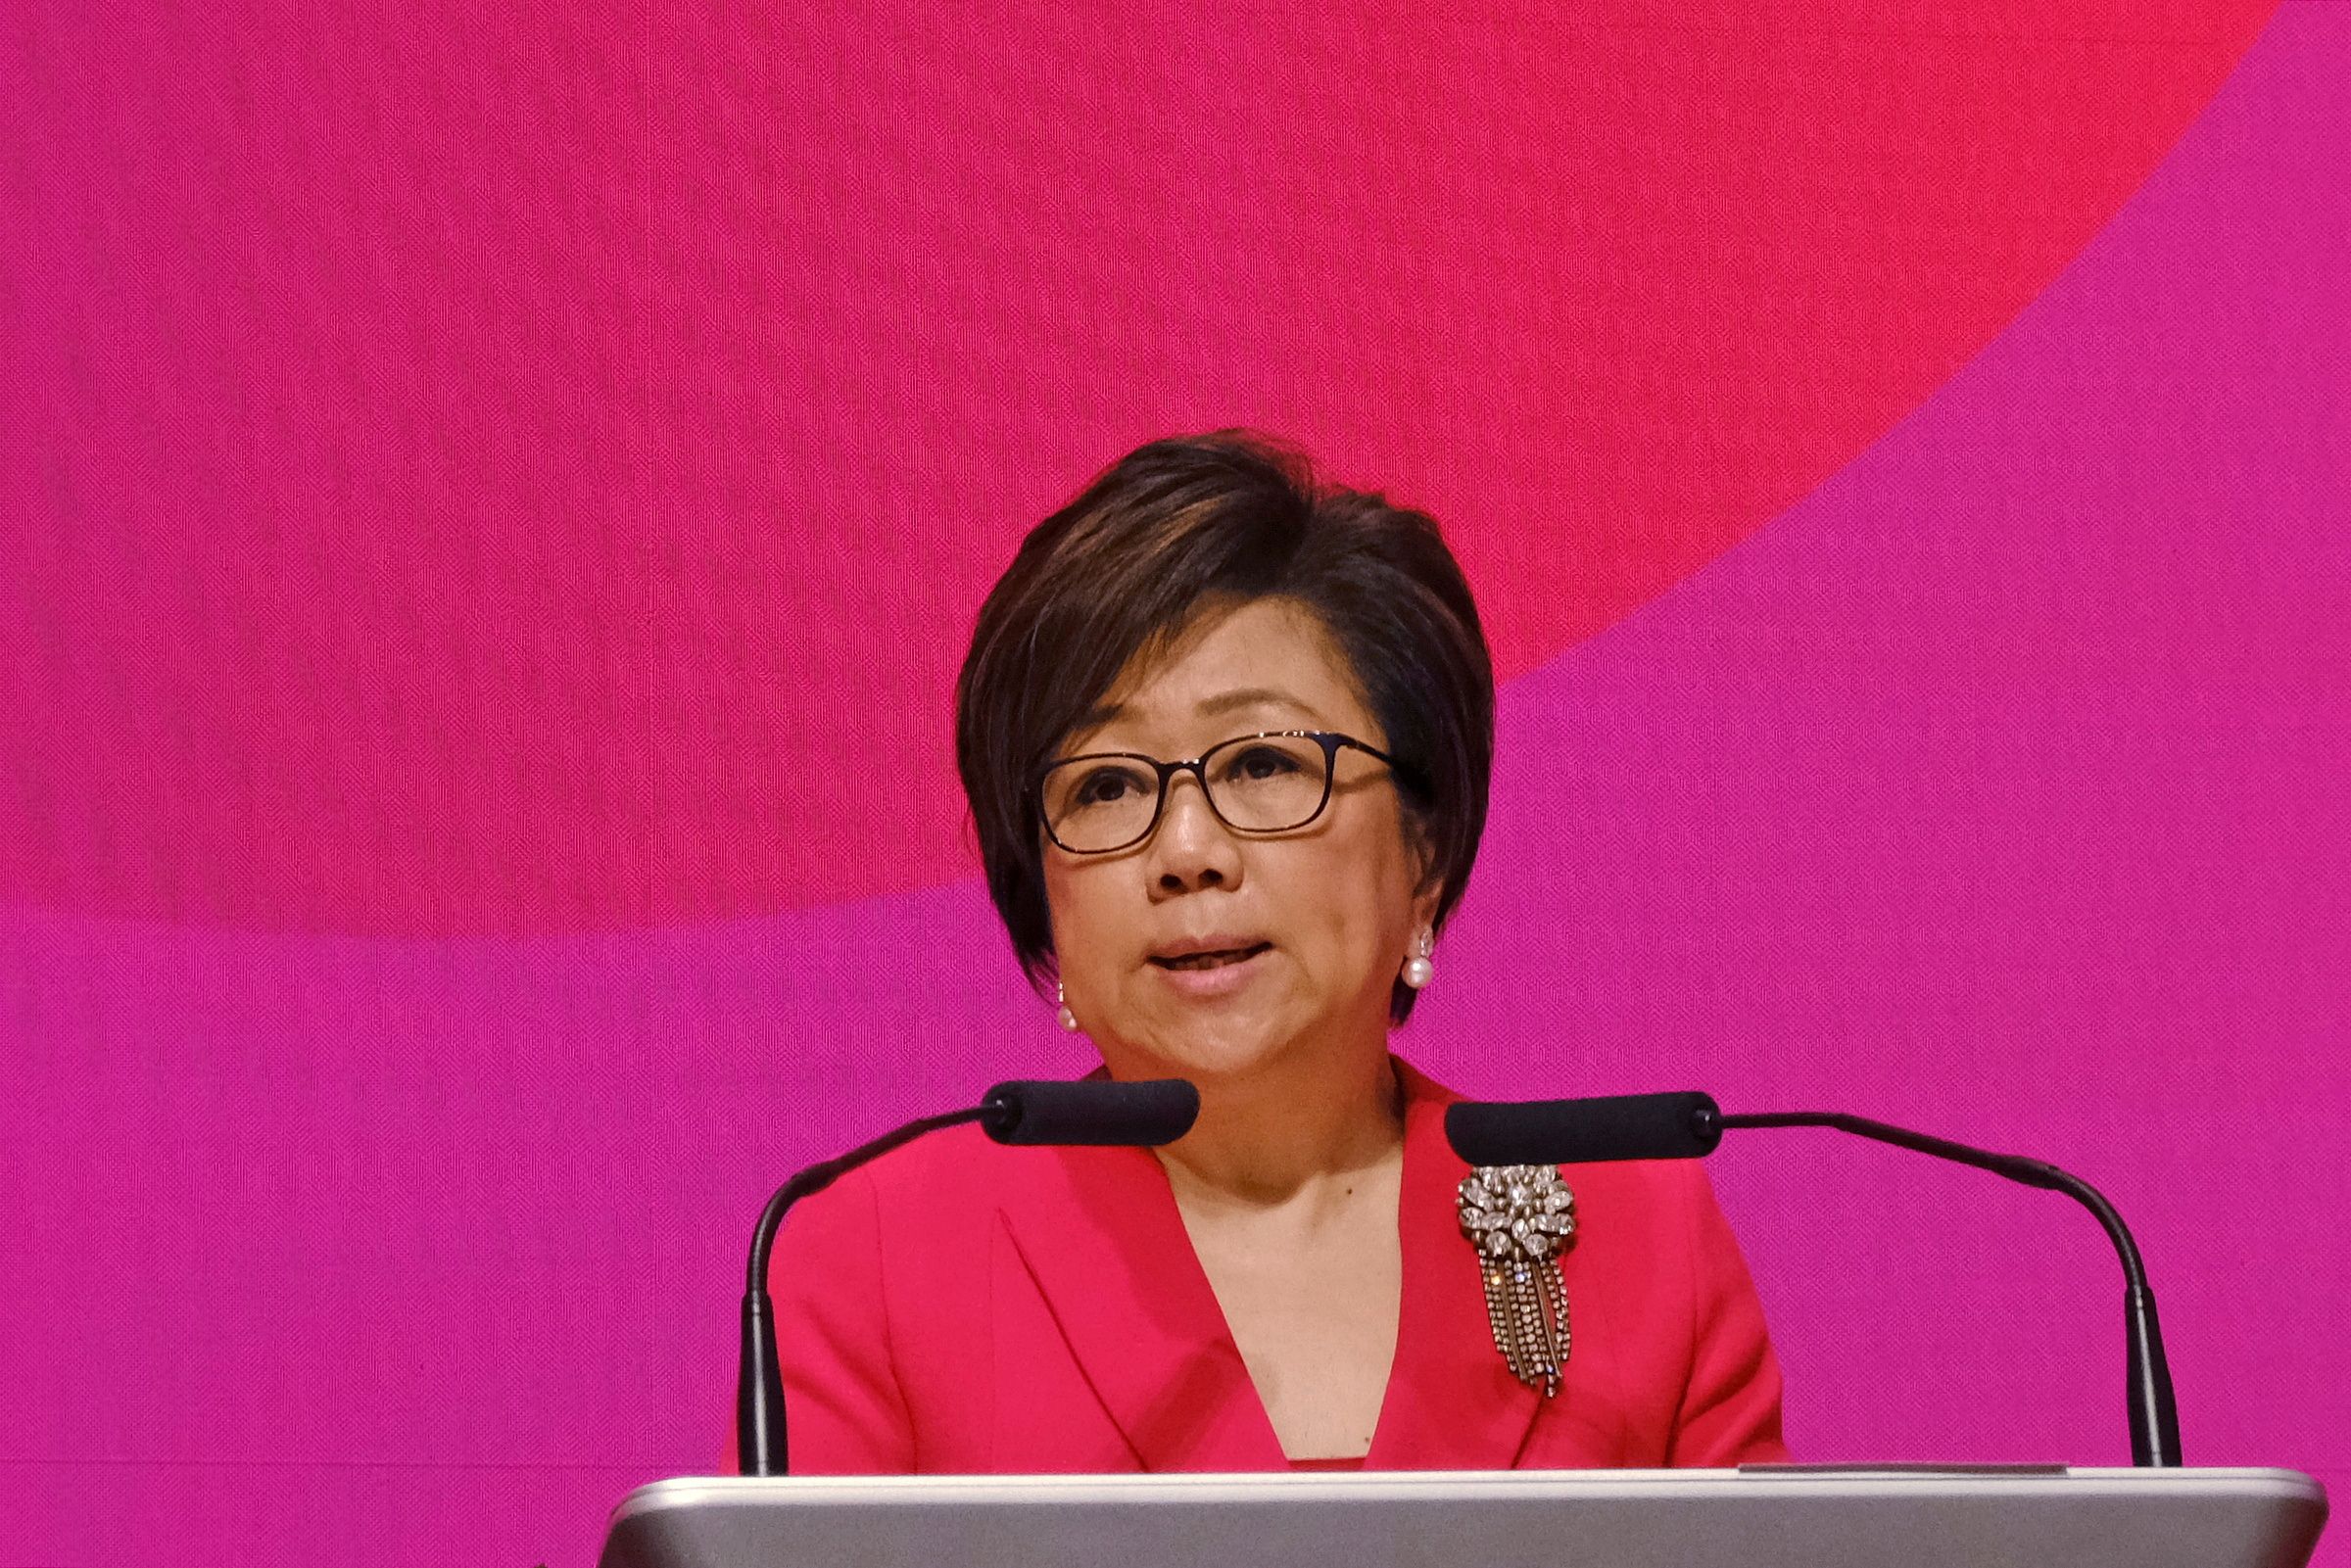 Hong Kong Exchanges and Clearing Ltd (HKEX) chairman Laura Cha Shih May-lung speaks during a ceremony marking the first day of trade after Lunar New Year at the Hong Kong stock exchange in Hong Kong